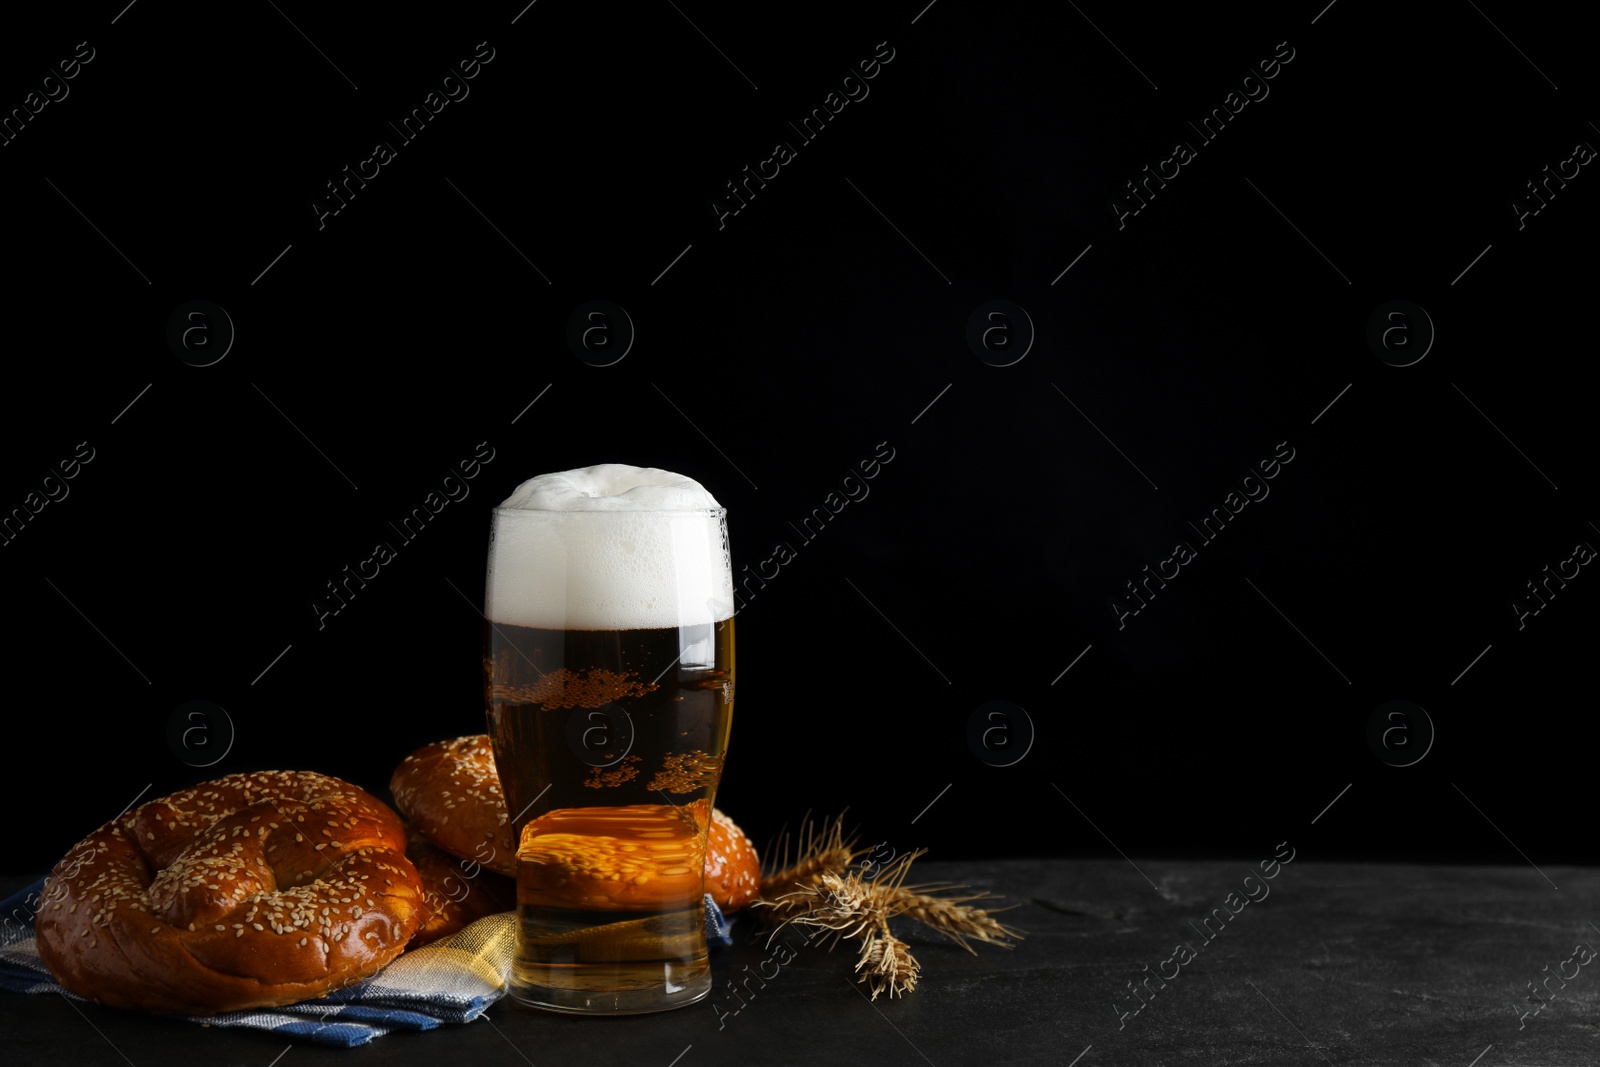 Photo of Tasty pretzels, glass of beer and wheat spikes on black table against dark background, space for text